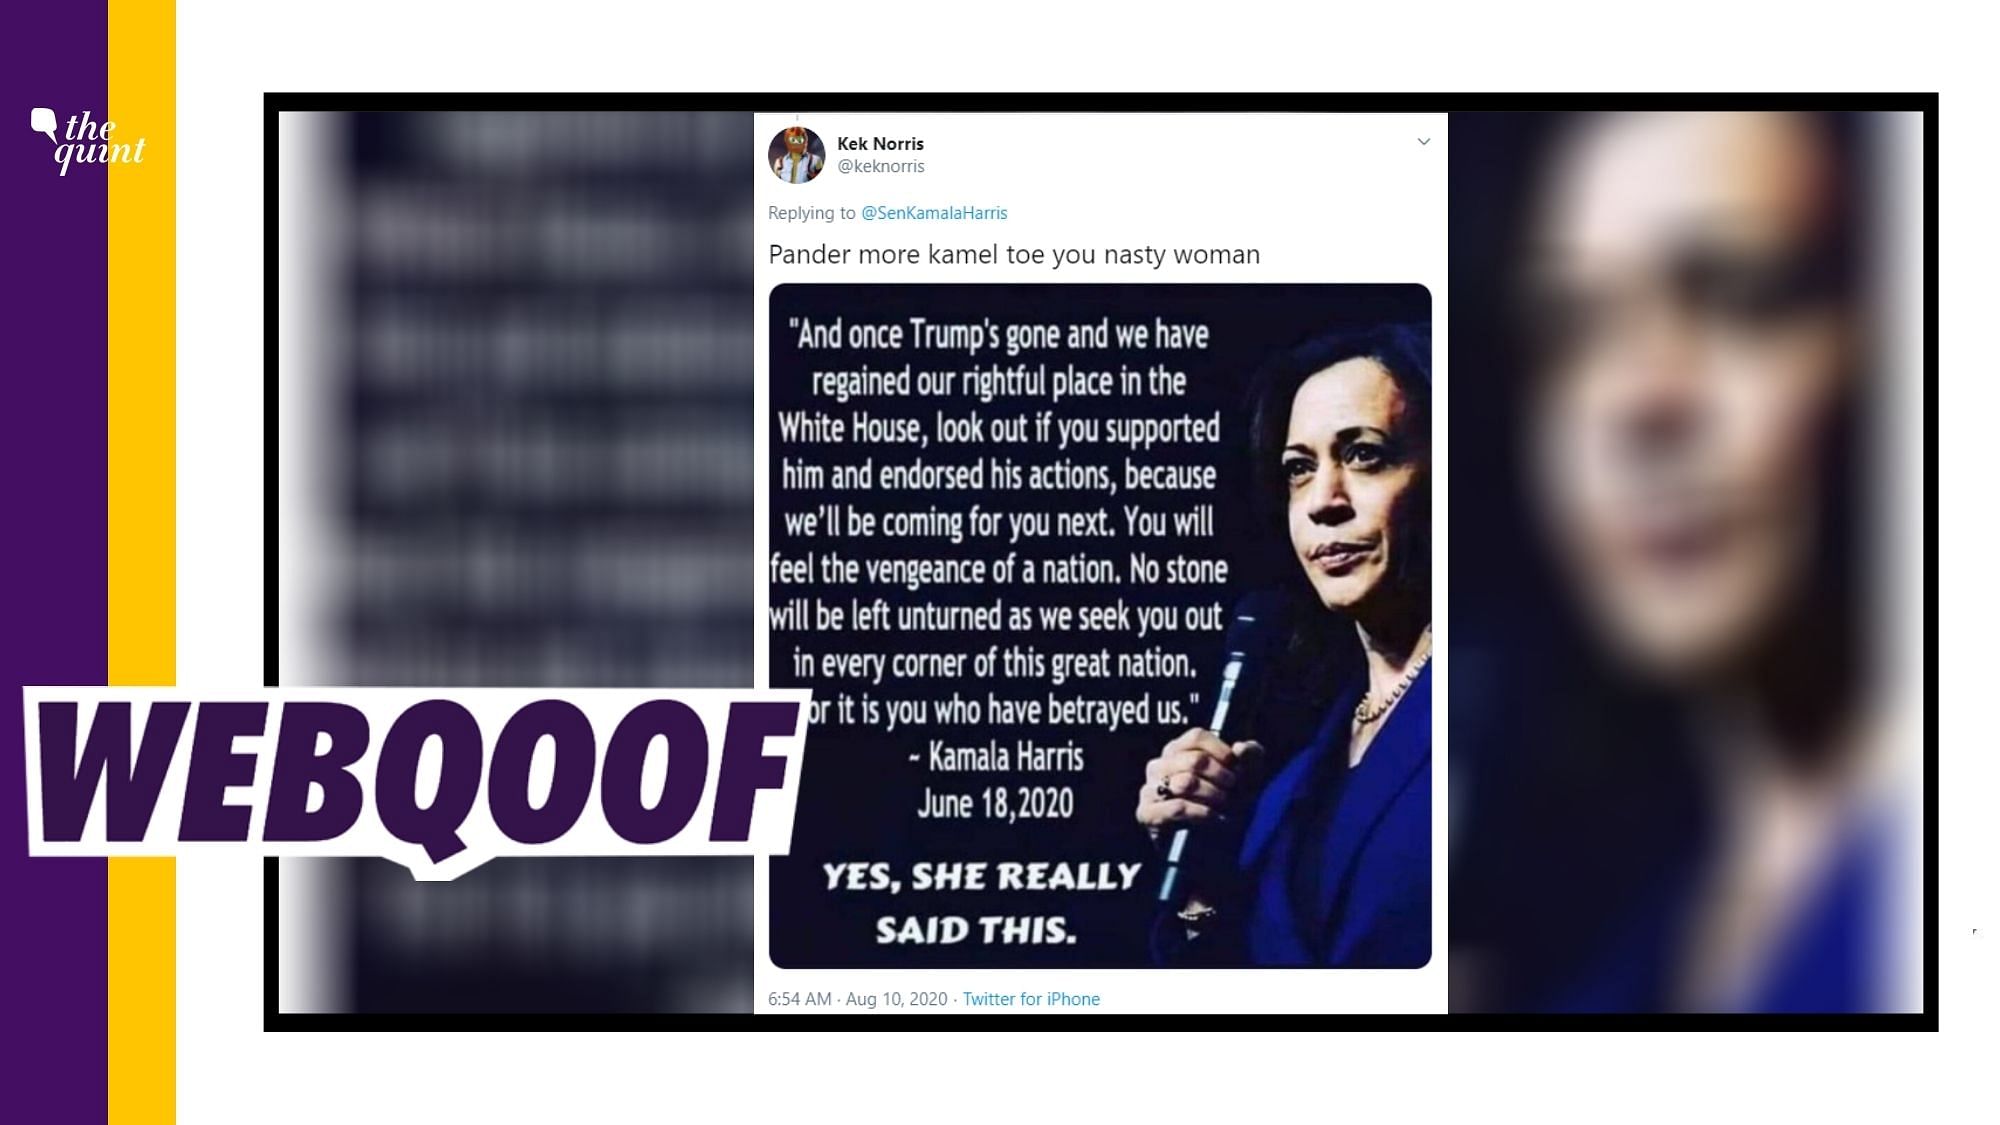 A post alleging that Harris threatened Trump supporters went viral. 